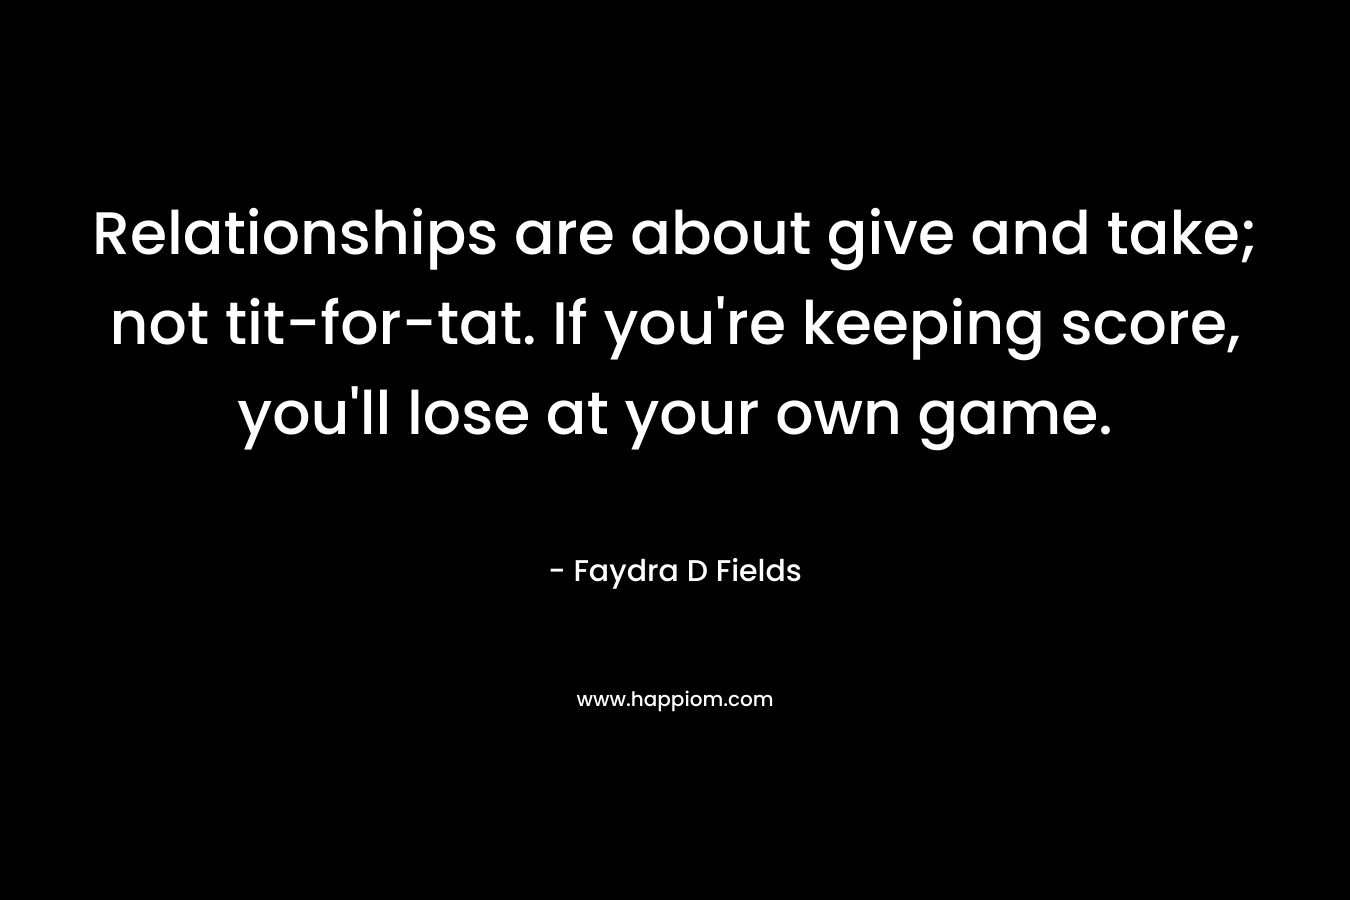 Relationships are about give and take; not tit-for-tat. If you’re keeping score, you’ll lose at your own game. – Faydra D Fields